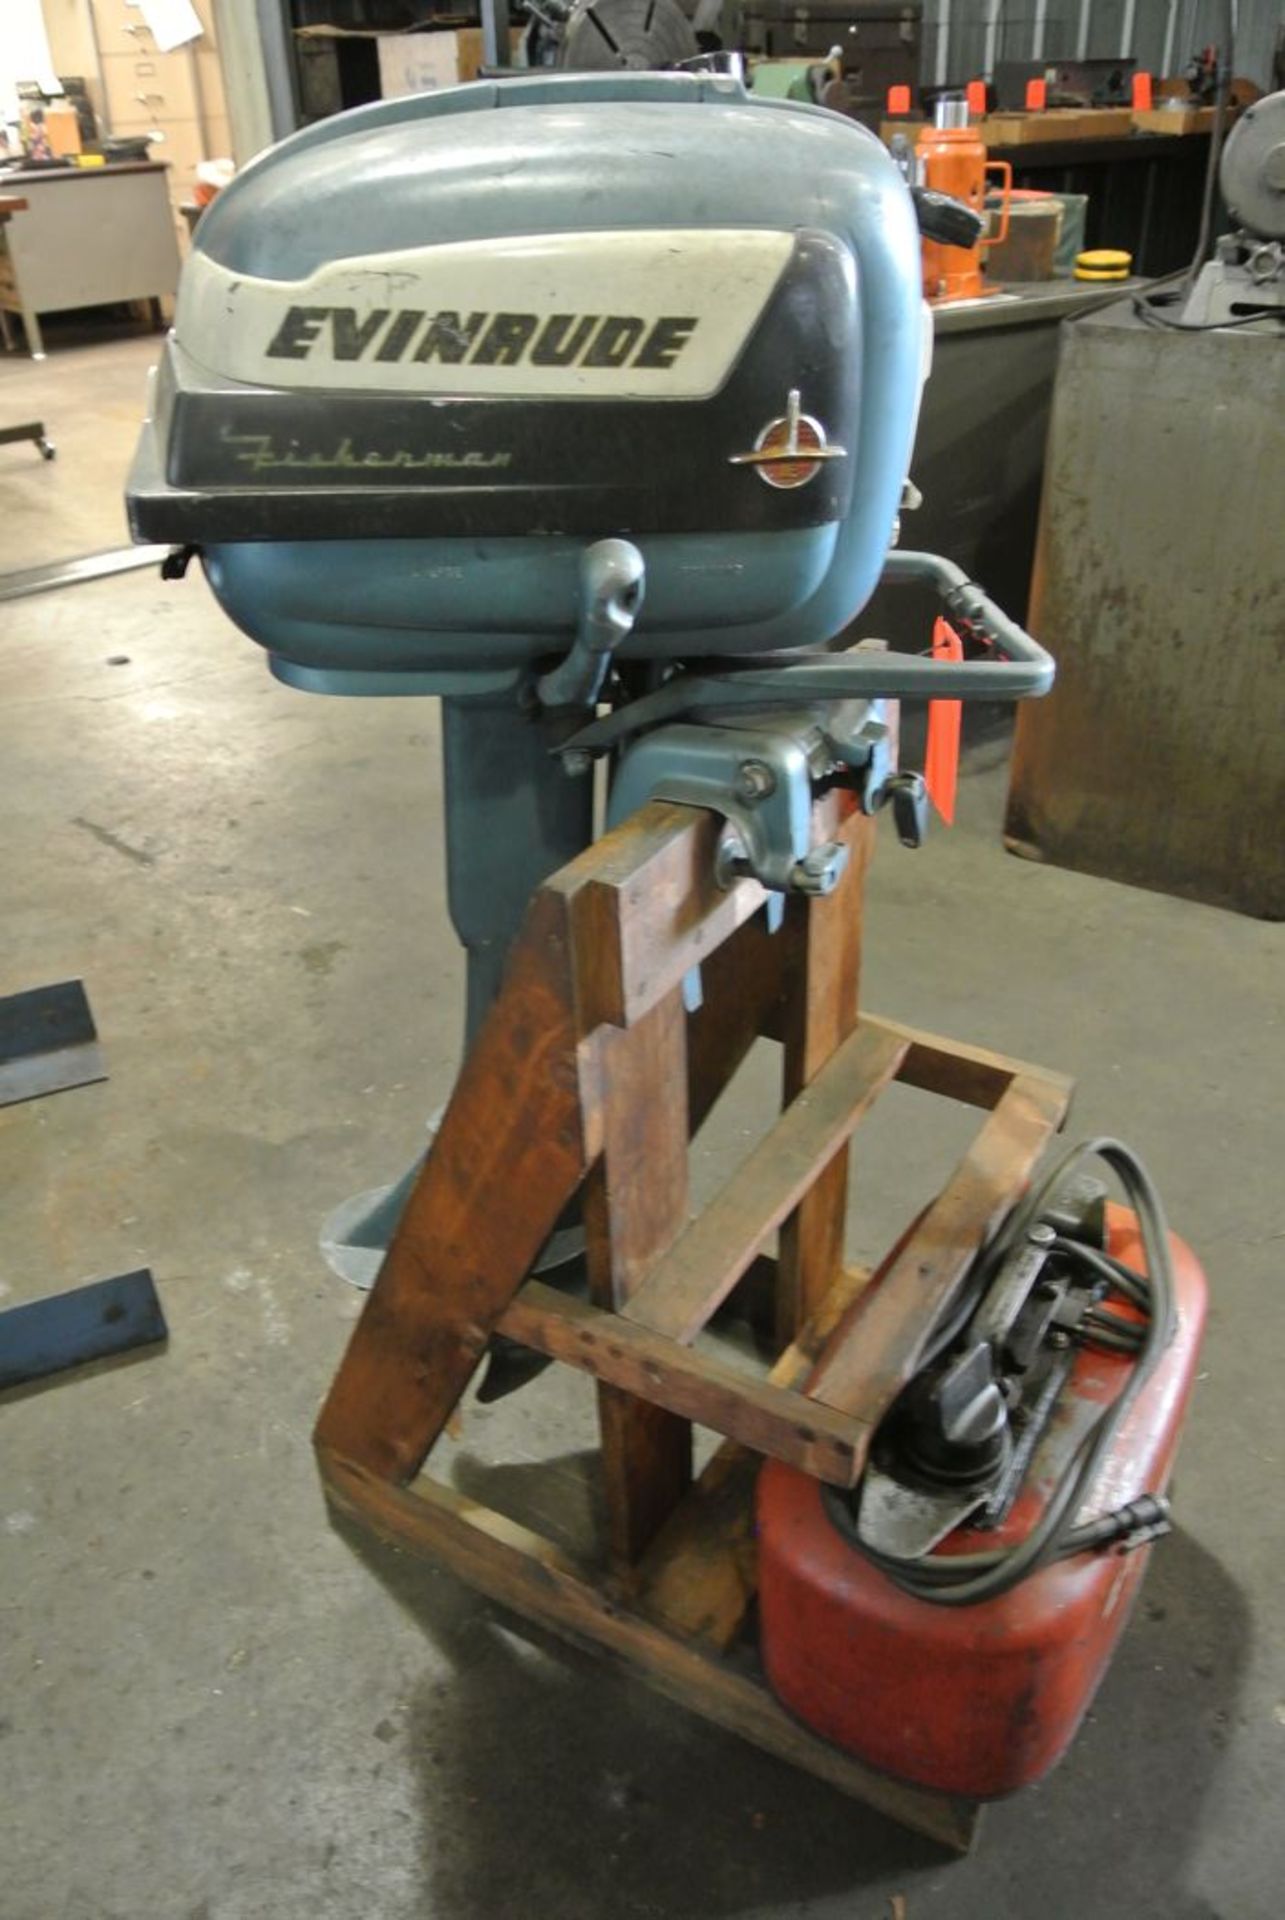 Evinrude Fisherman Outboard Motor; with Stand and Gas Tank - Image 2 of 3